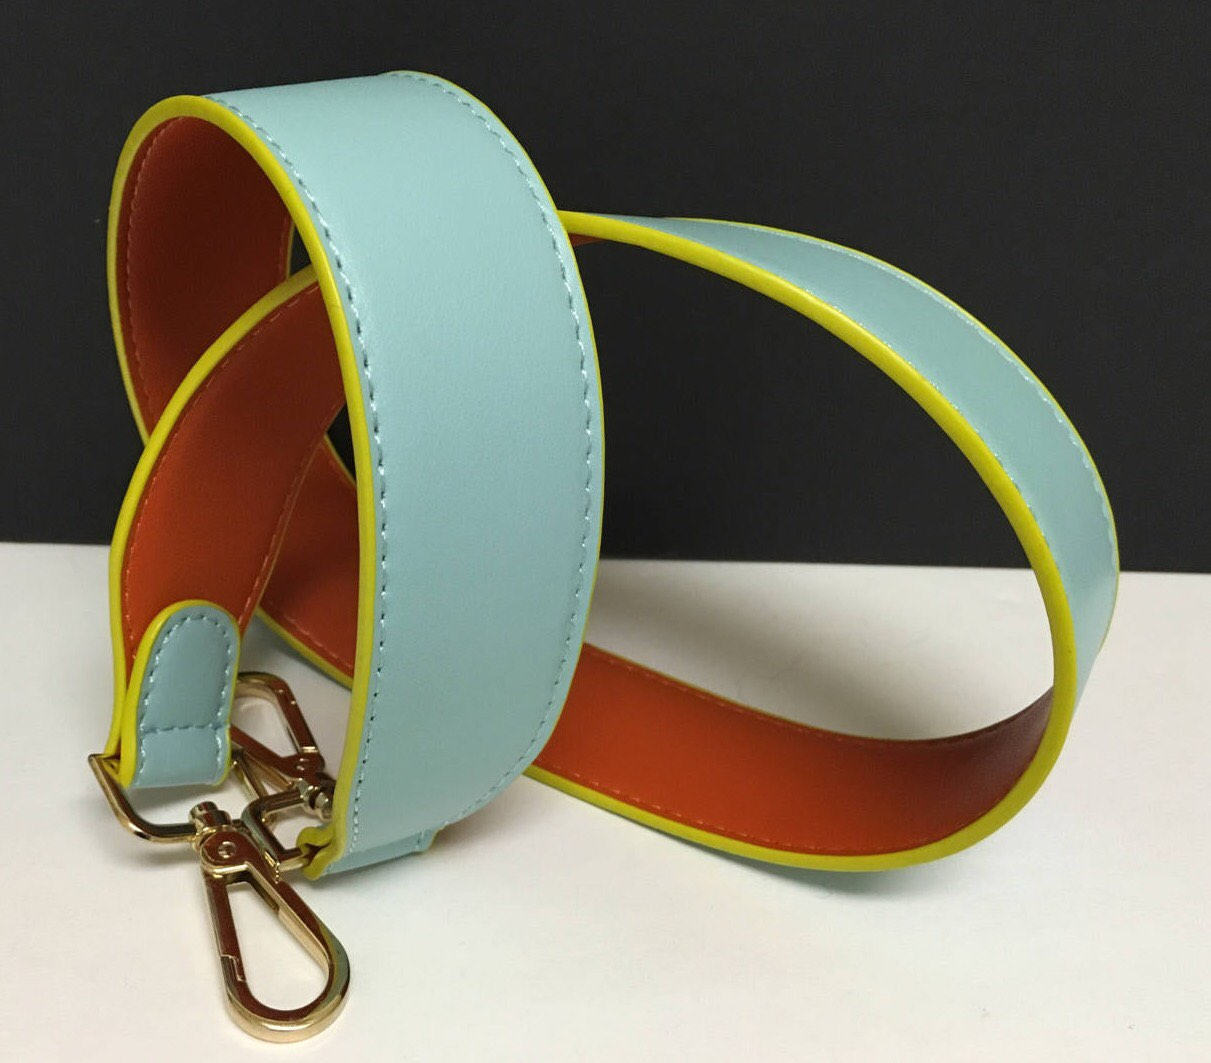 Strap You - Leather Bag Strap - Colorful Leather Strap Removable Strap for Bag and Purses ...